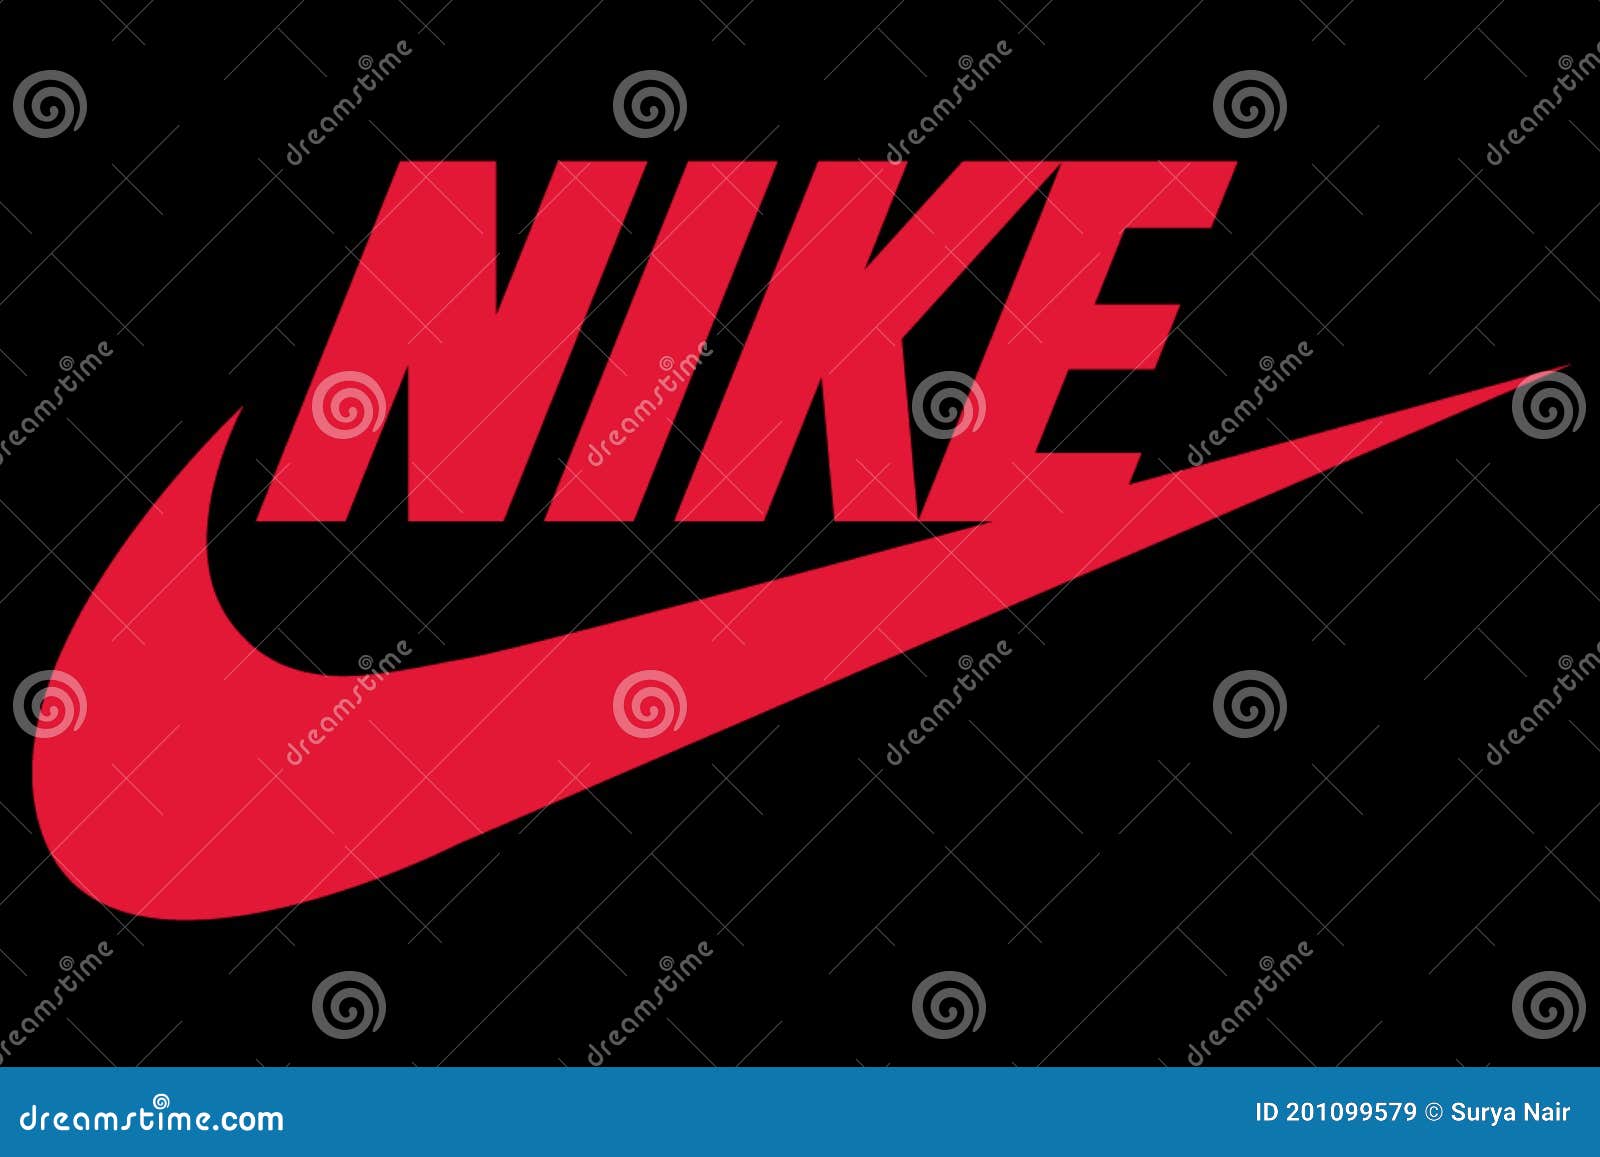 Nike Logo Printed on Paper. Nike, Stock Image Image of commercial, gear: 201099579